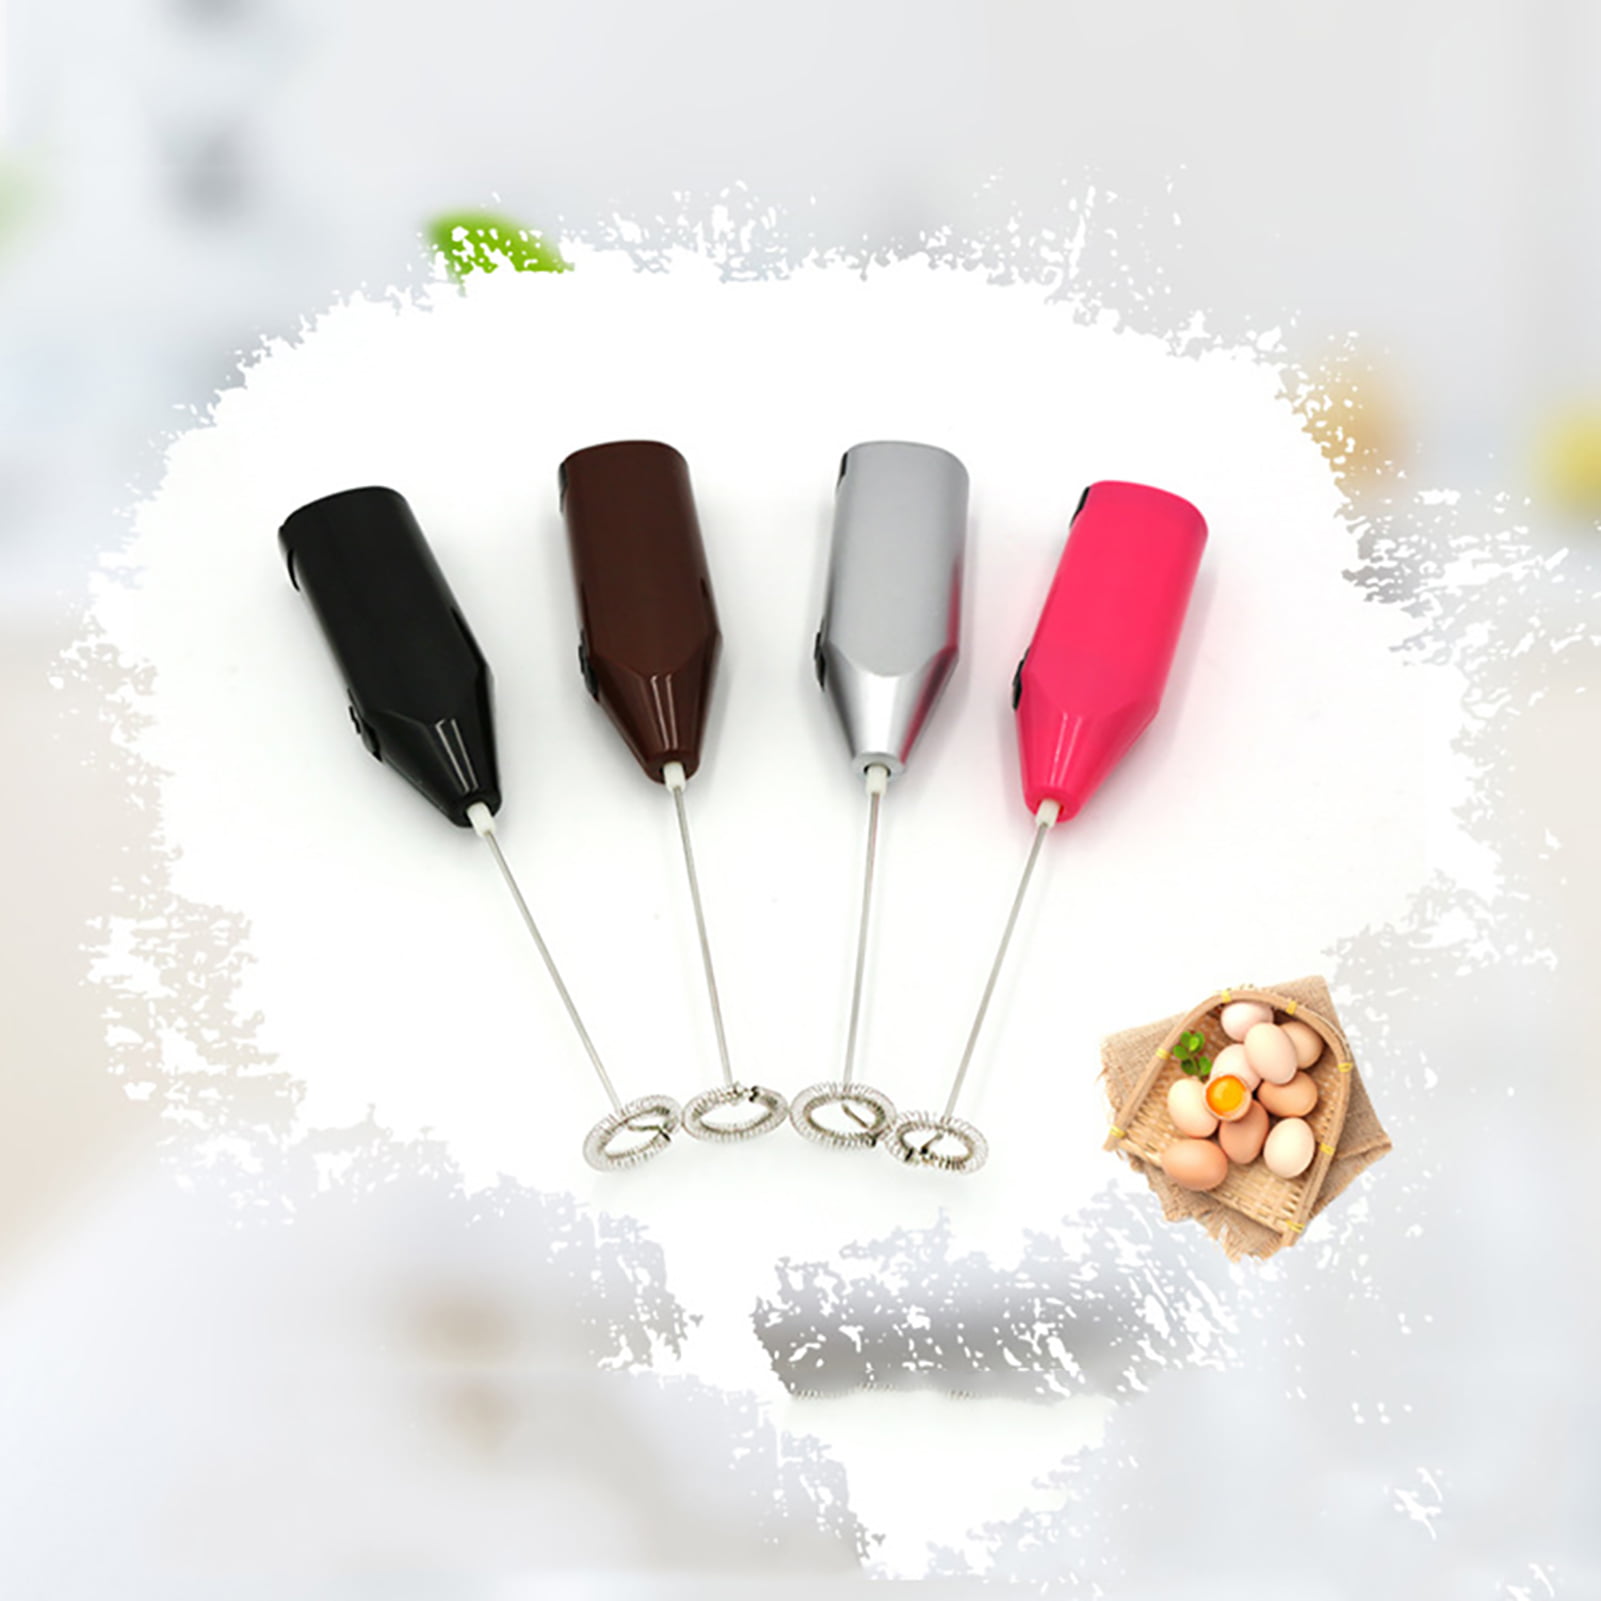 Hubbe - Milk/Coffee Frother - Mixer Wand, Shop Today. Get it Tomorrow!